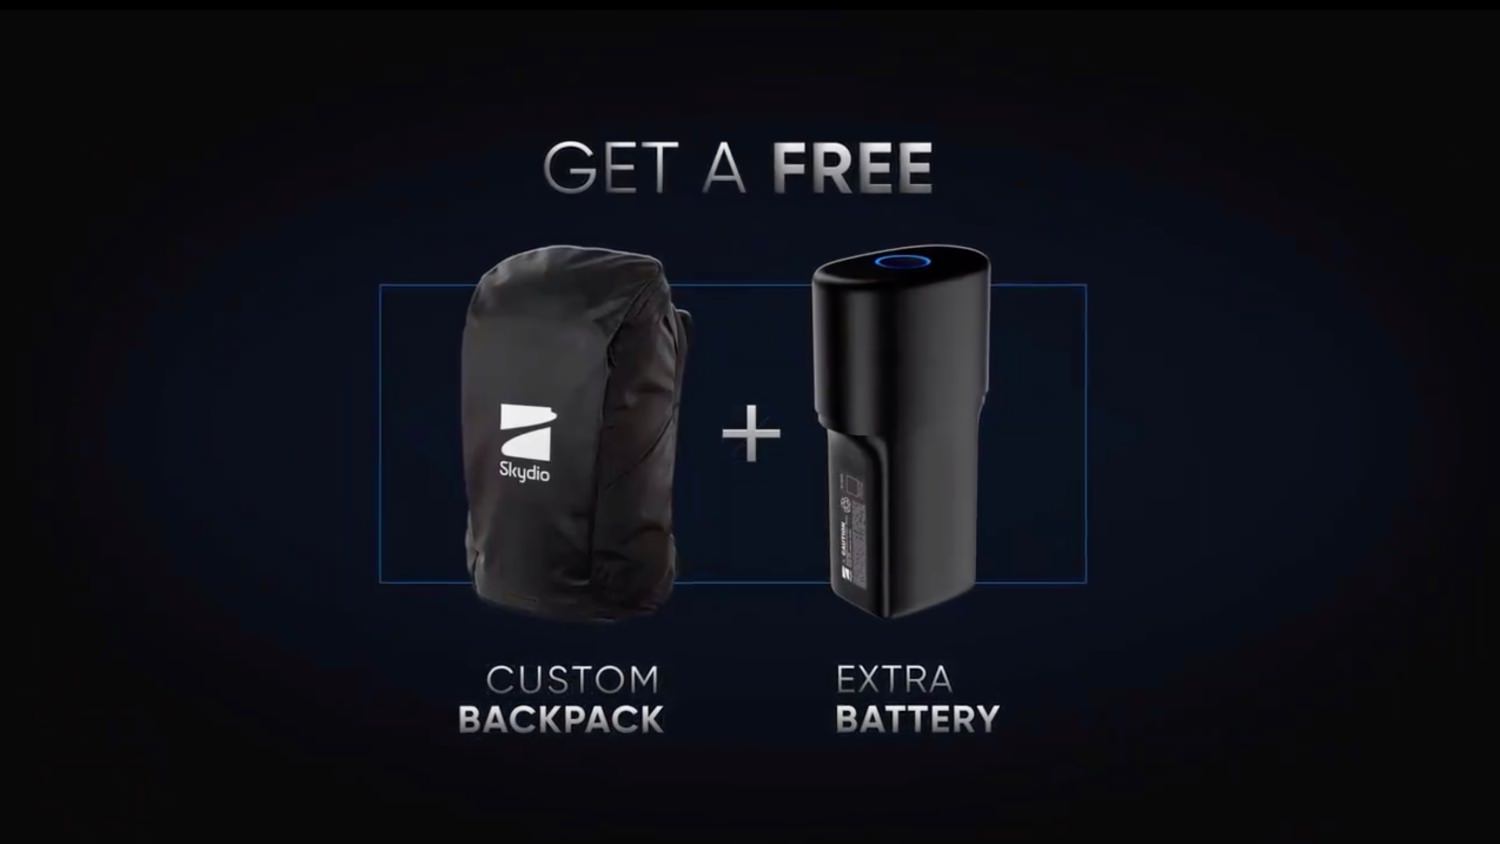 Skydio R1 Black Friday promotion: Free backpack and battery - $278 value